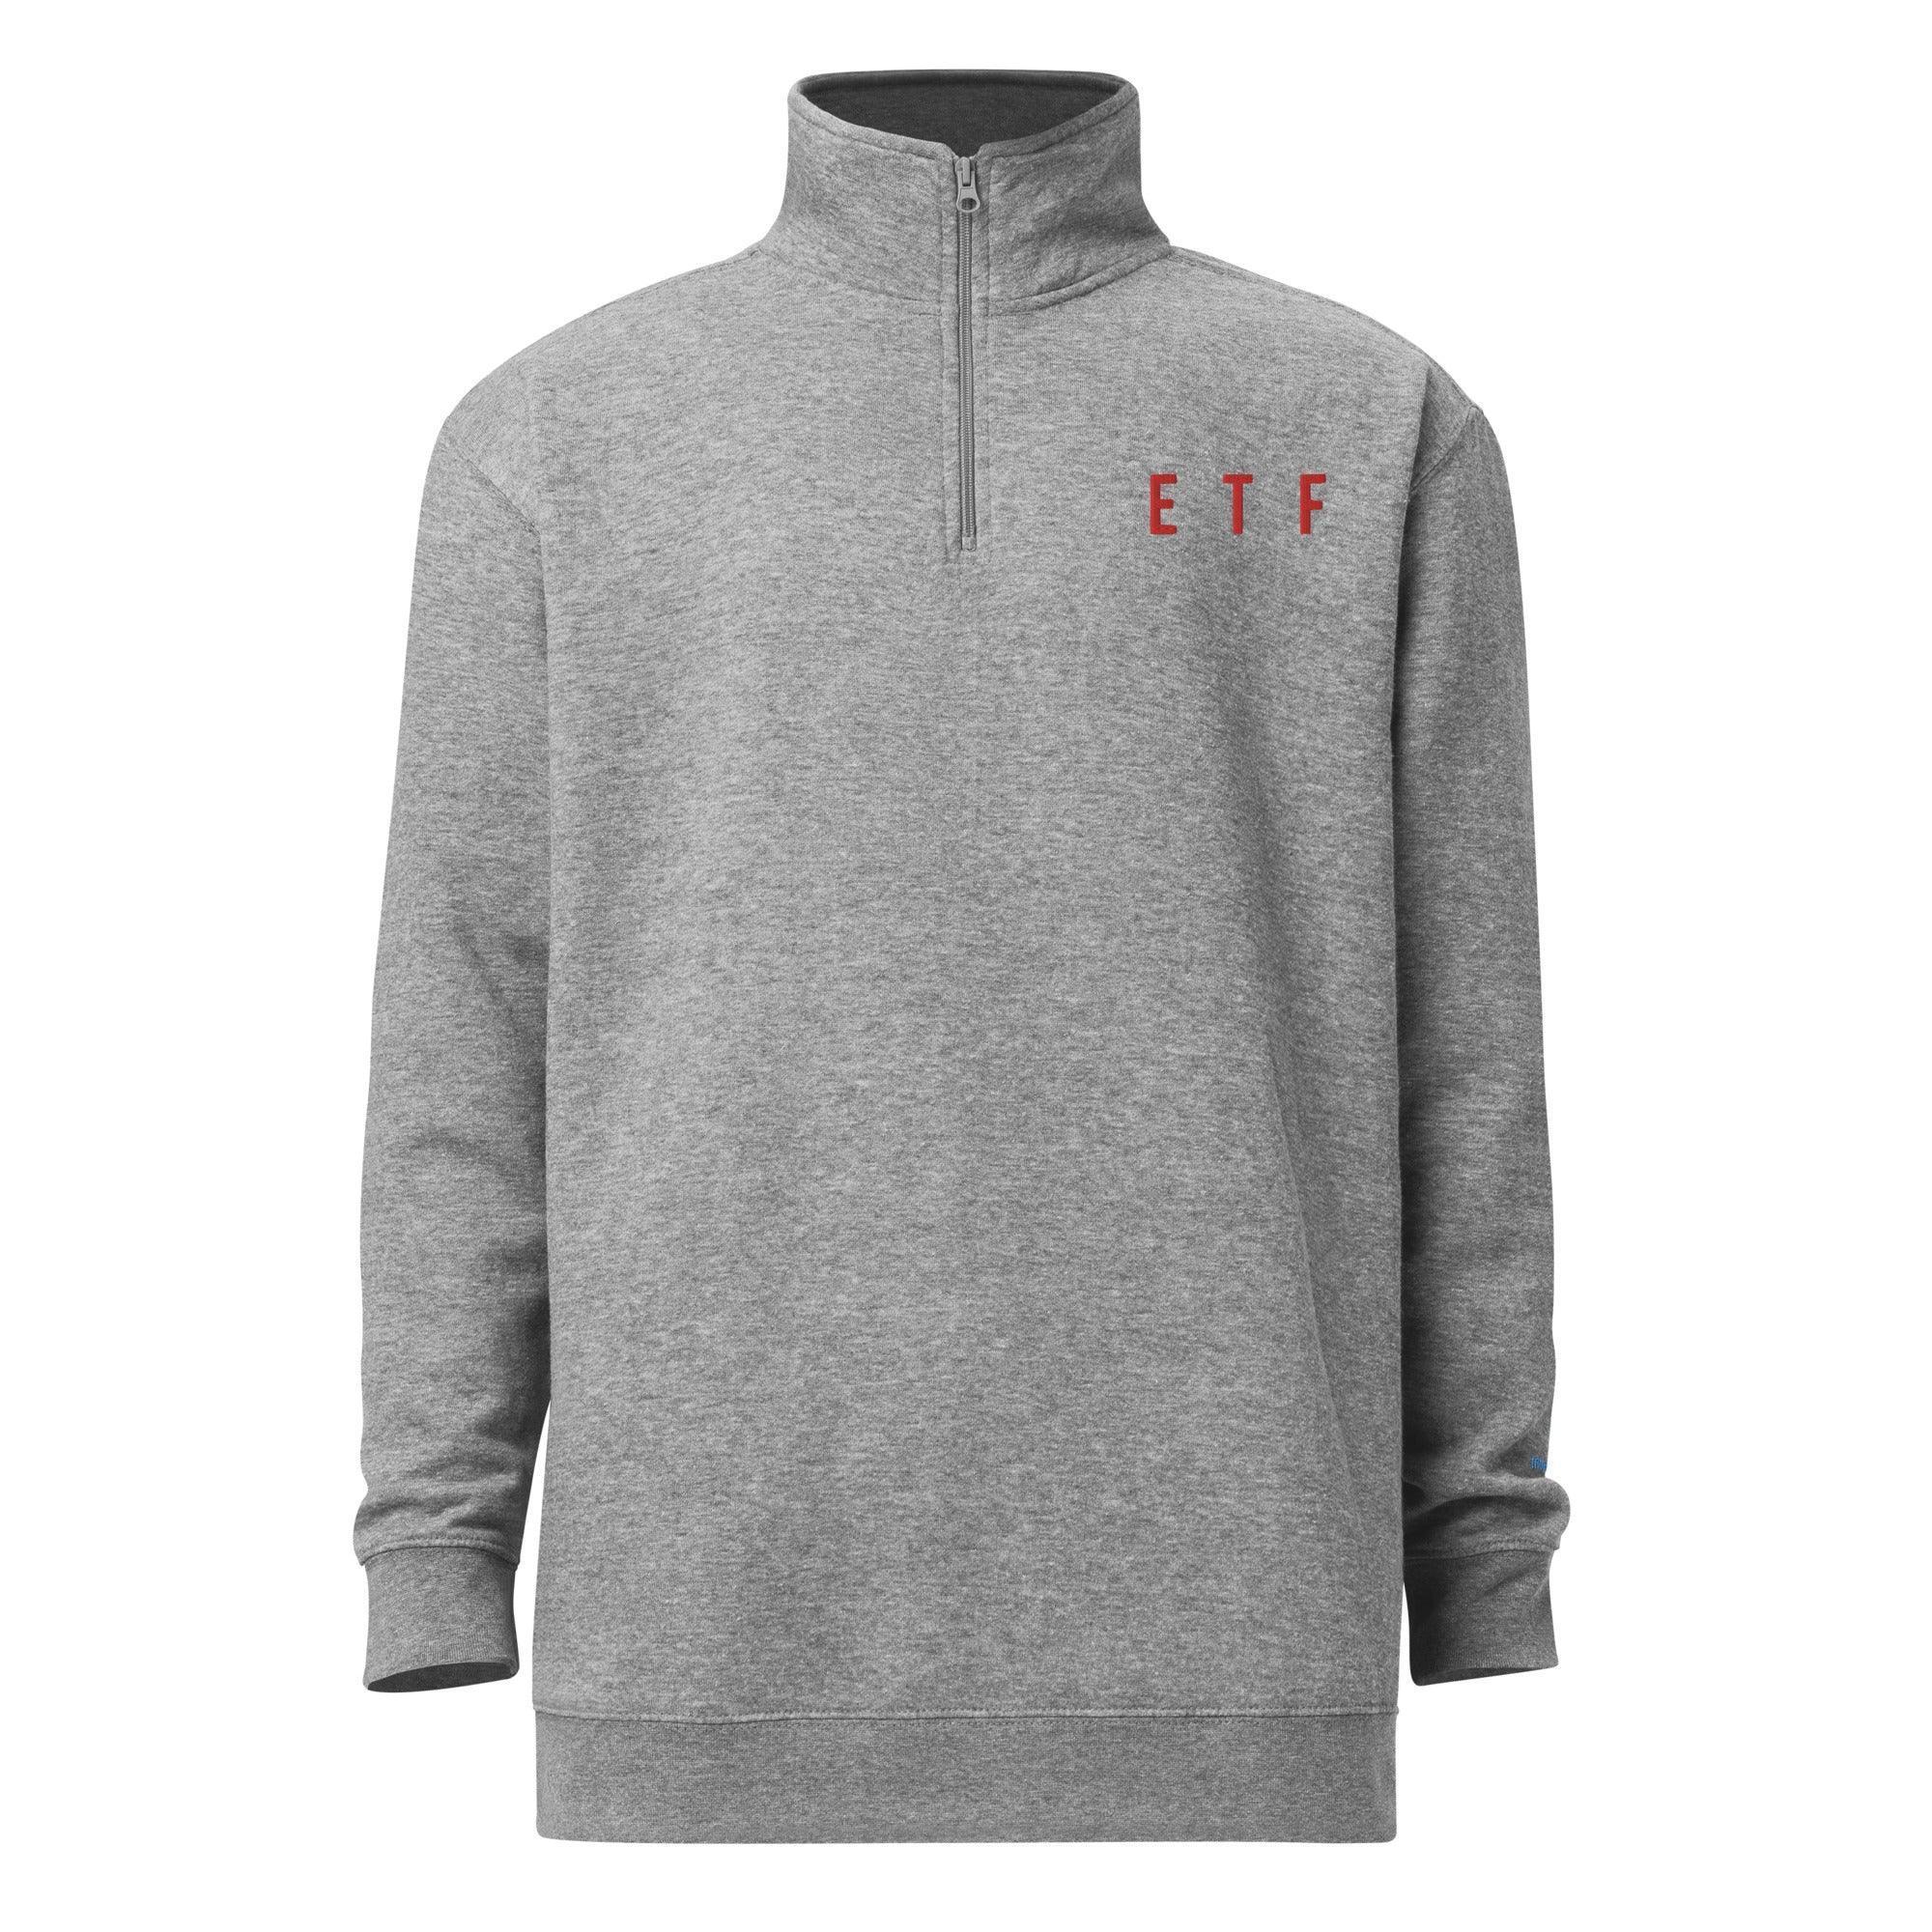 ETF | Exchange Traded Fund Fleece Pullover - InvestmenTees